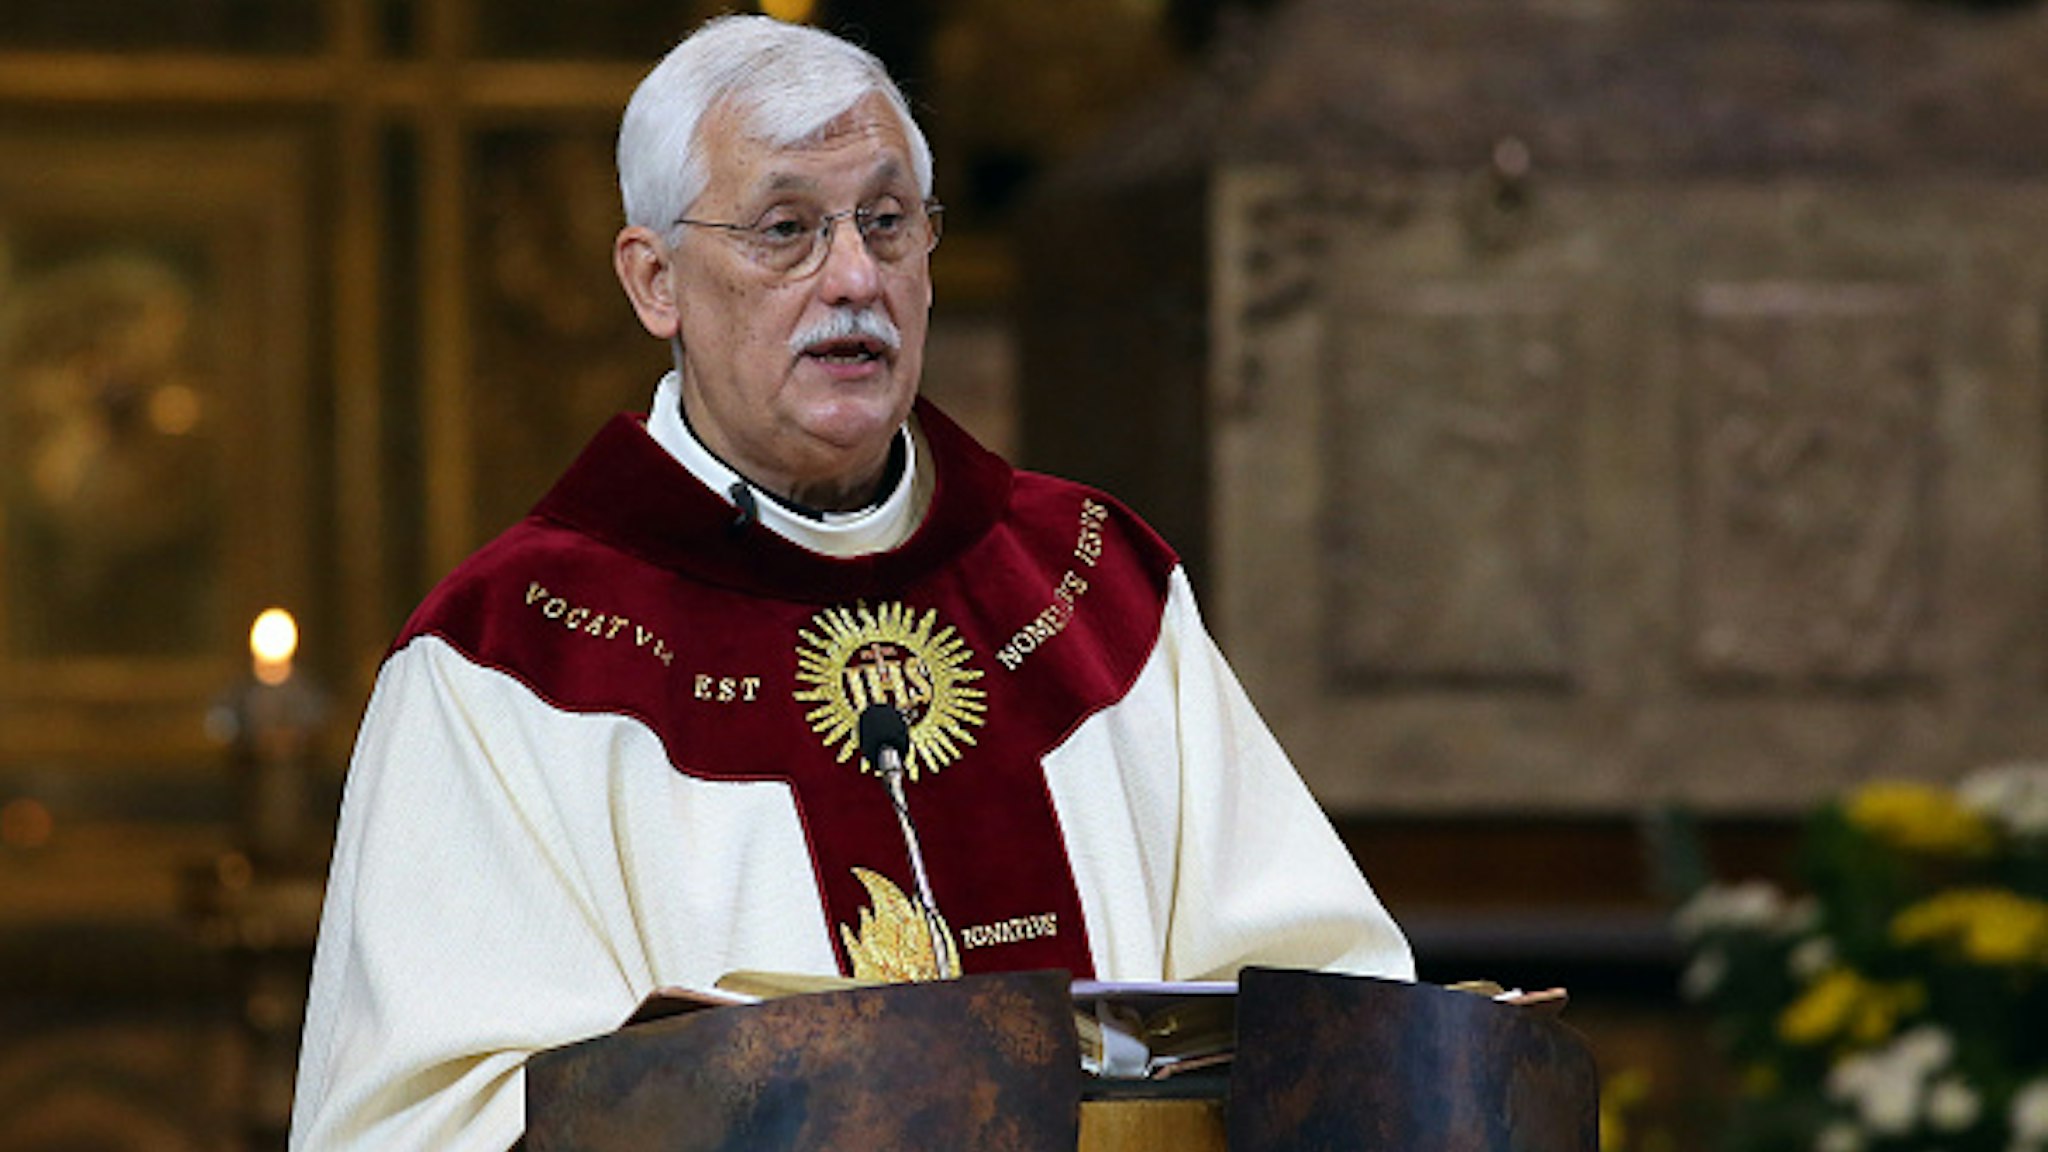 New Superior General of The Society of Jesus father Arturo Sosa Abascal delivers his first homily as leader of the Jesuits during the Thanksgiving Mass at the Church of Jesus, on October 15, 2016 in Rome, Italy.